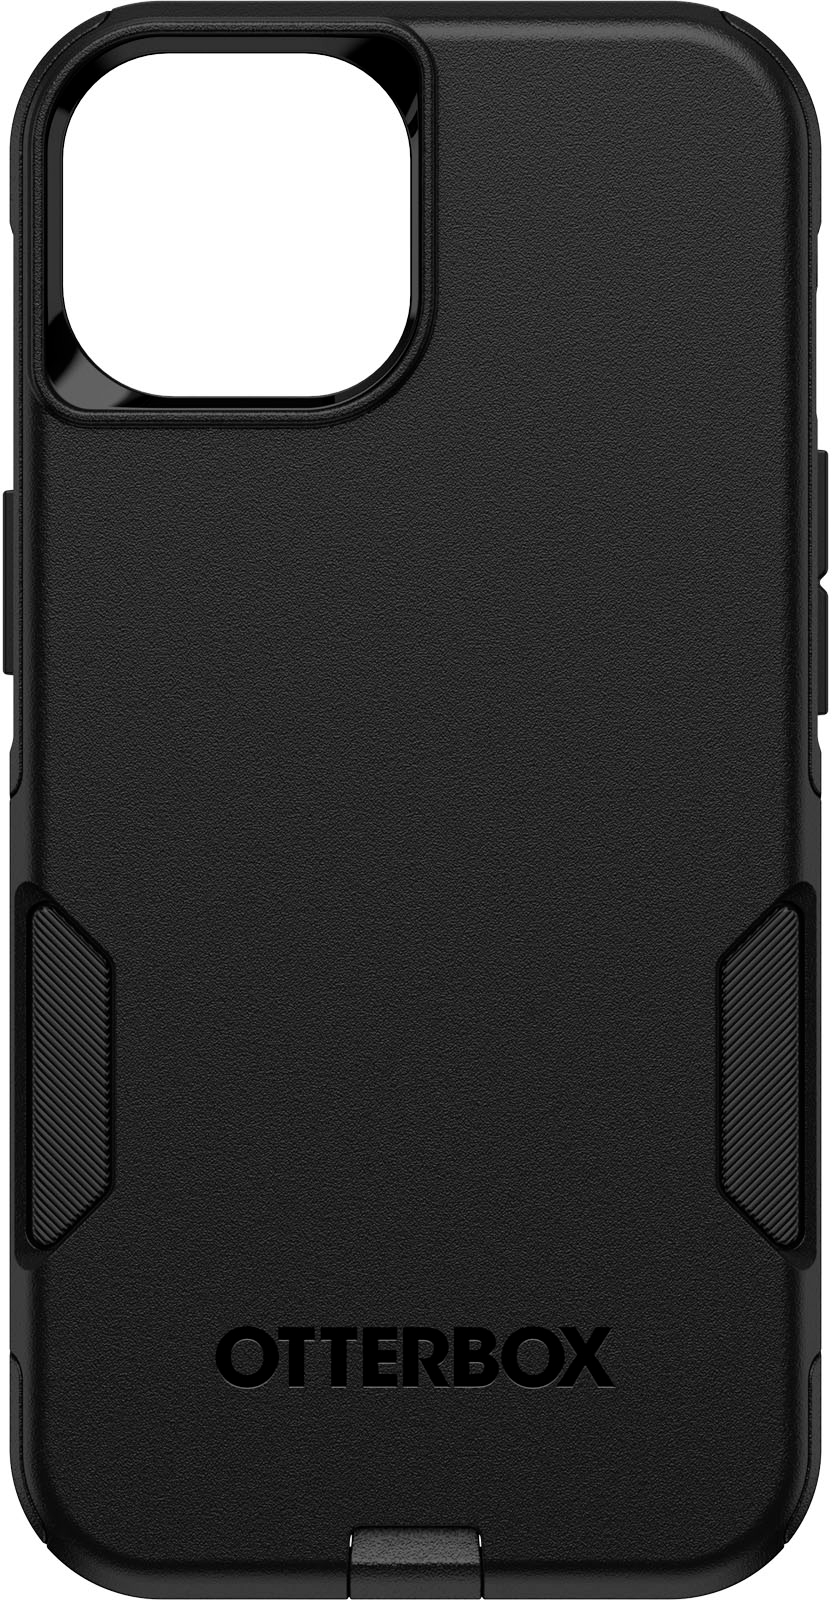 Grey Apple AirTag Case  OtterBox Core Series Case